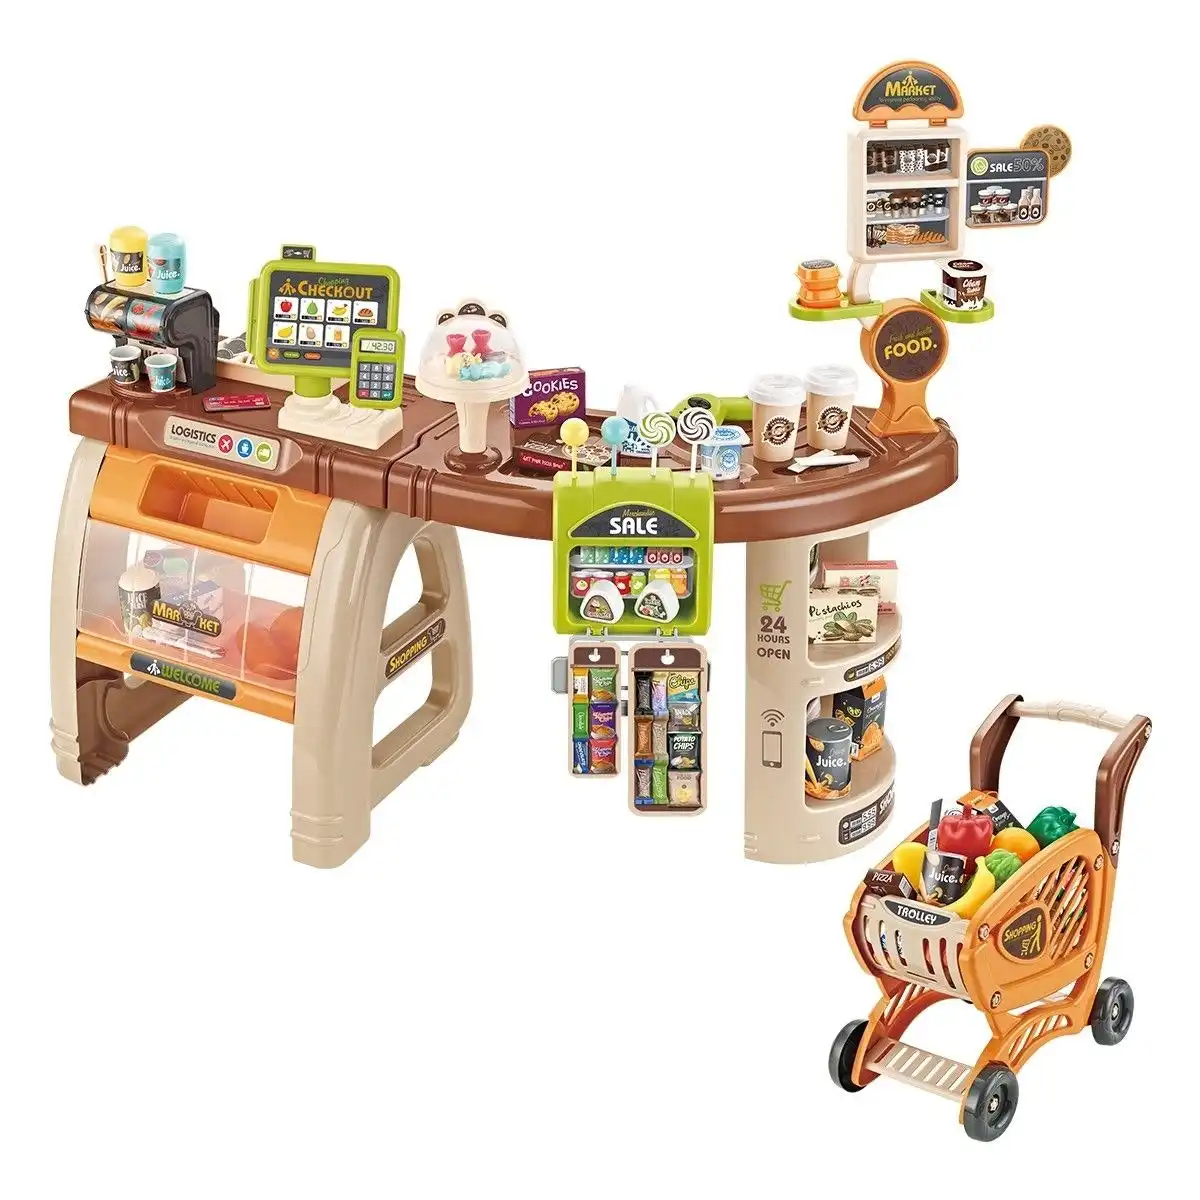 Ausway 65 Accessories Kids Pretend Role Play Shop Grocery Supermarket Toy Set with Trolley